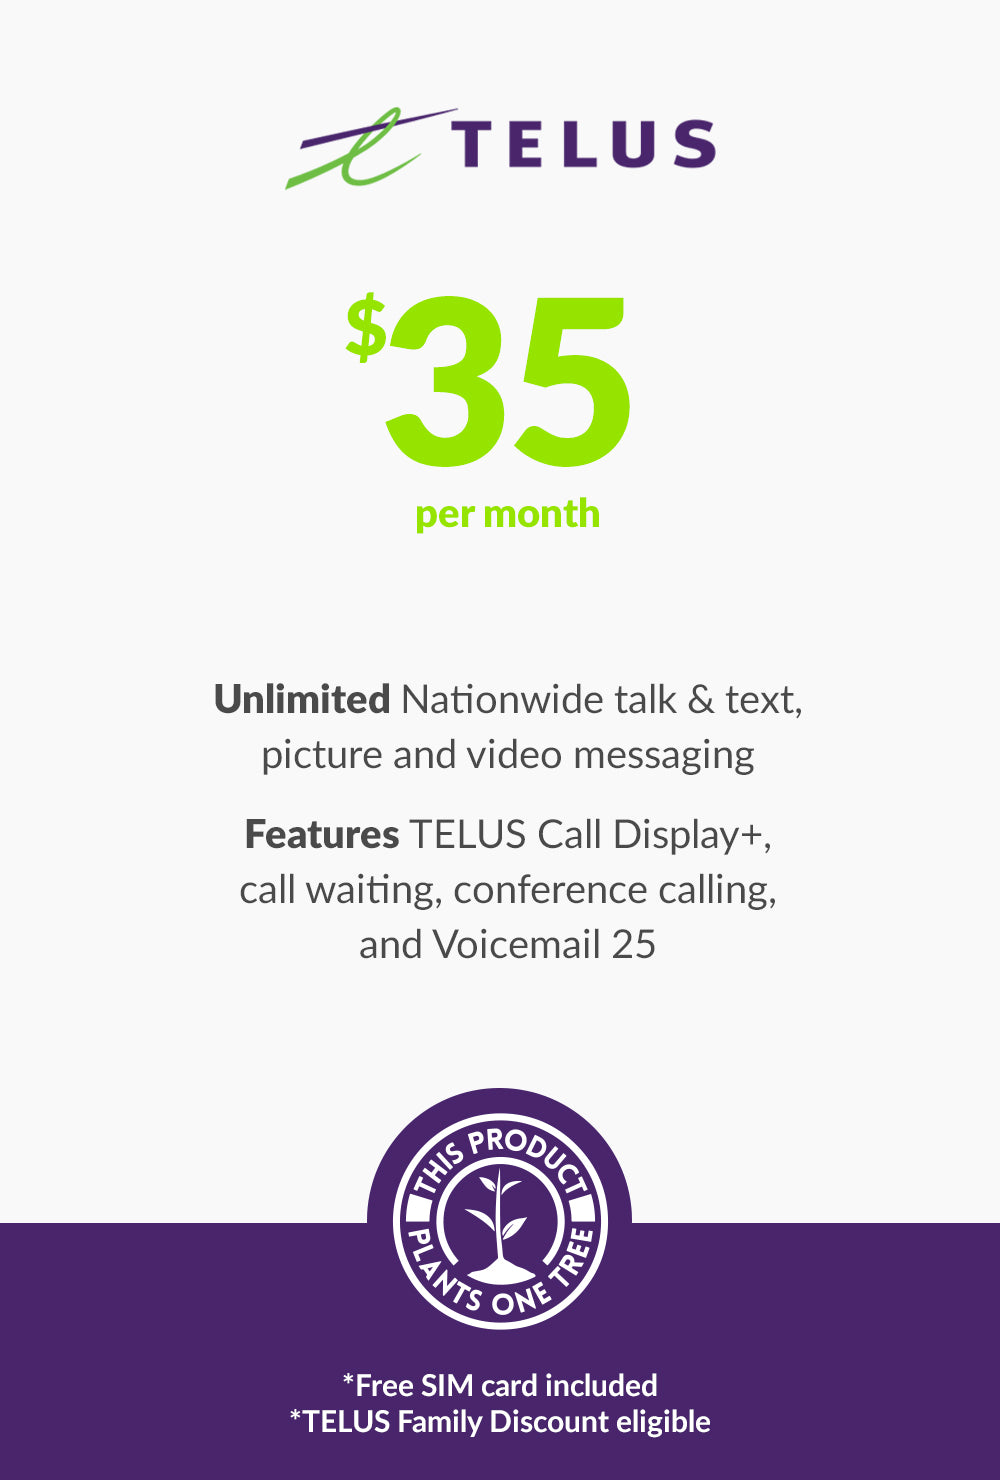 TELUS Unlimited Talk & Text for $35